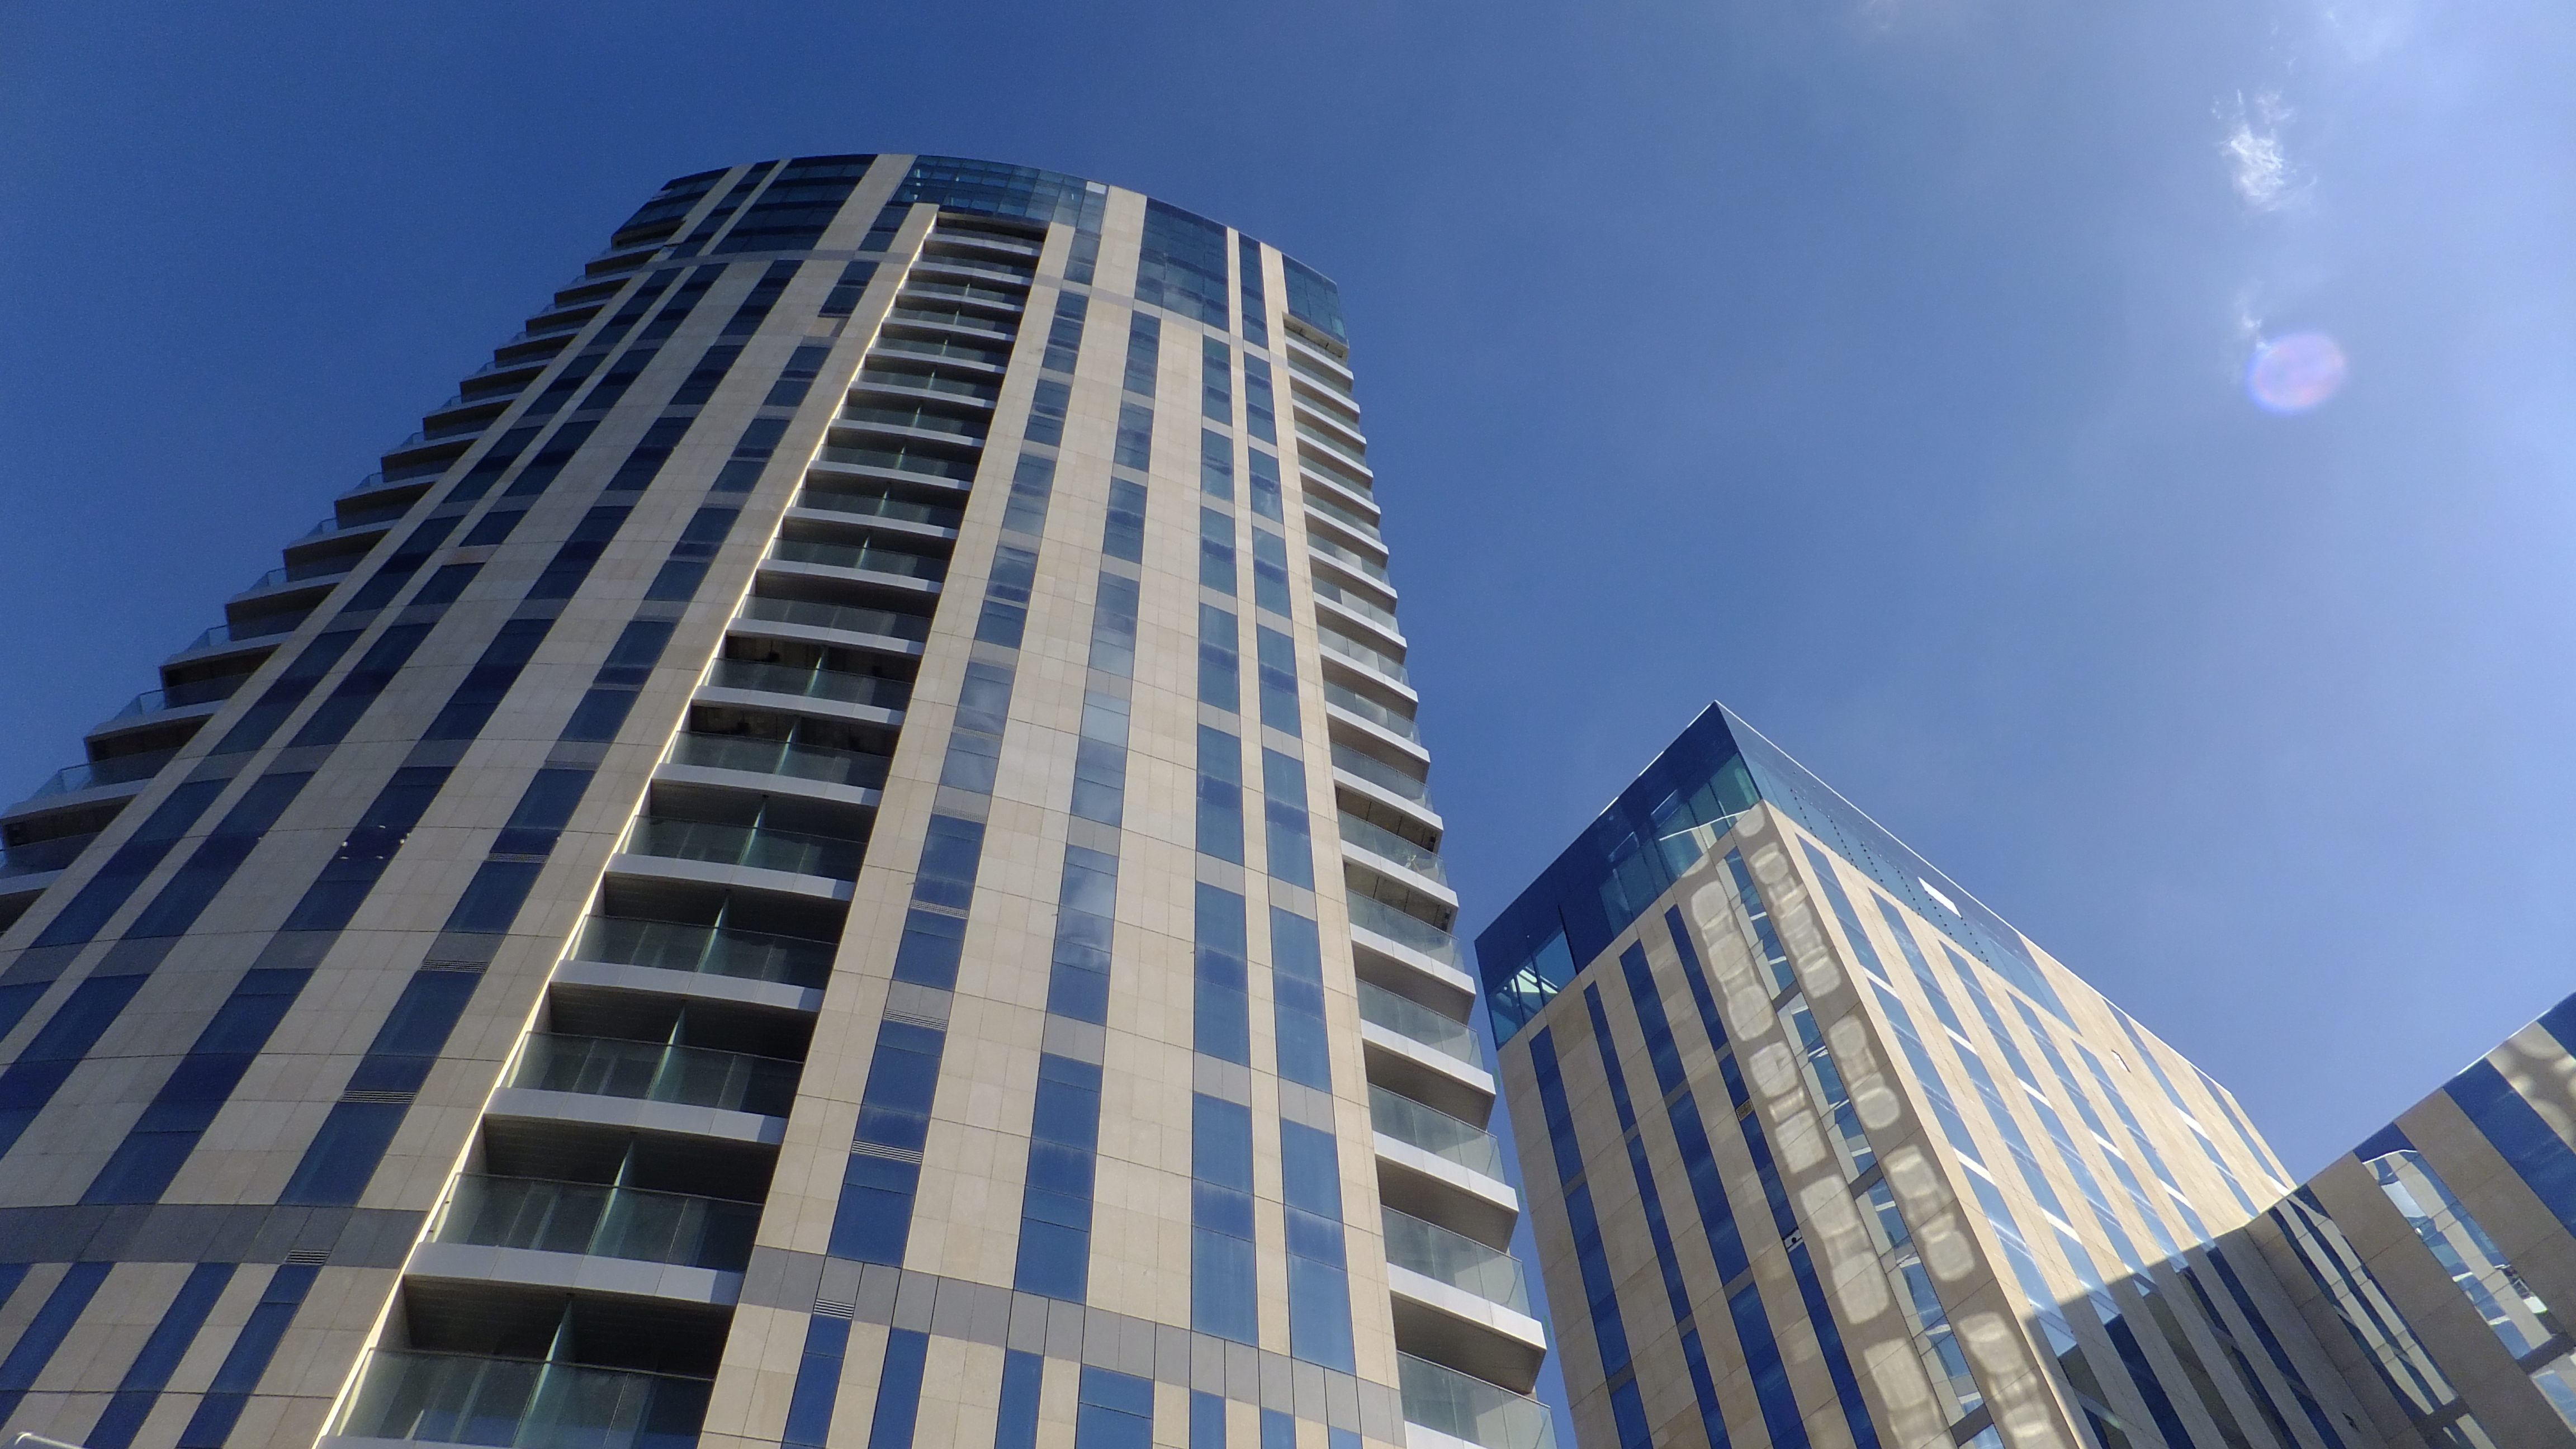 Greenwich tower and hotel sees cracks on exterior – wholesale cladding replacement required